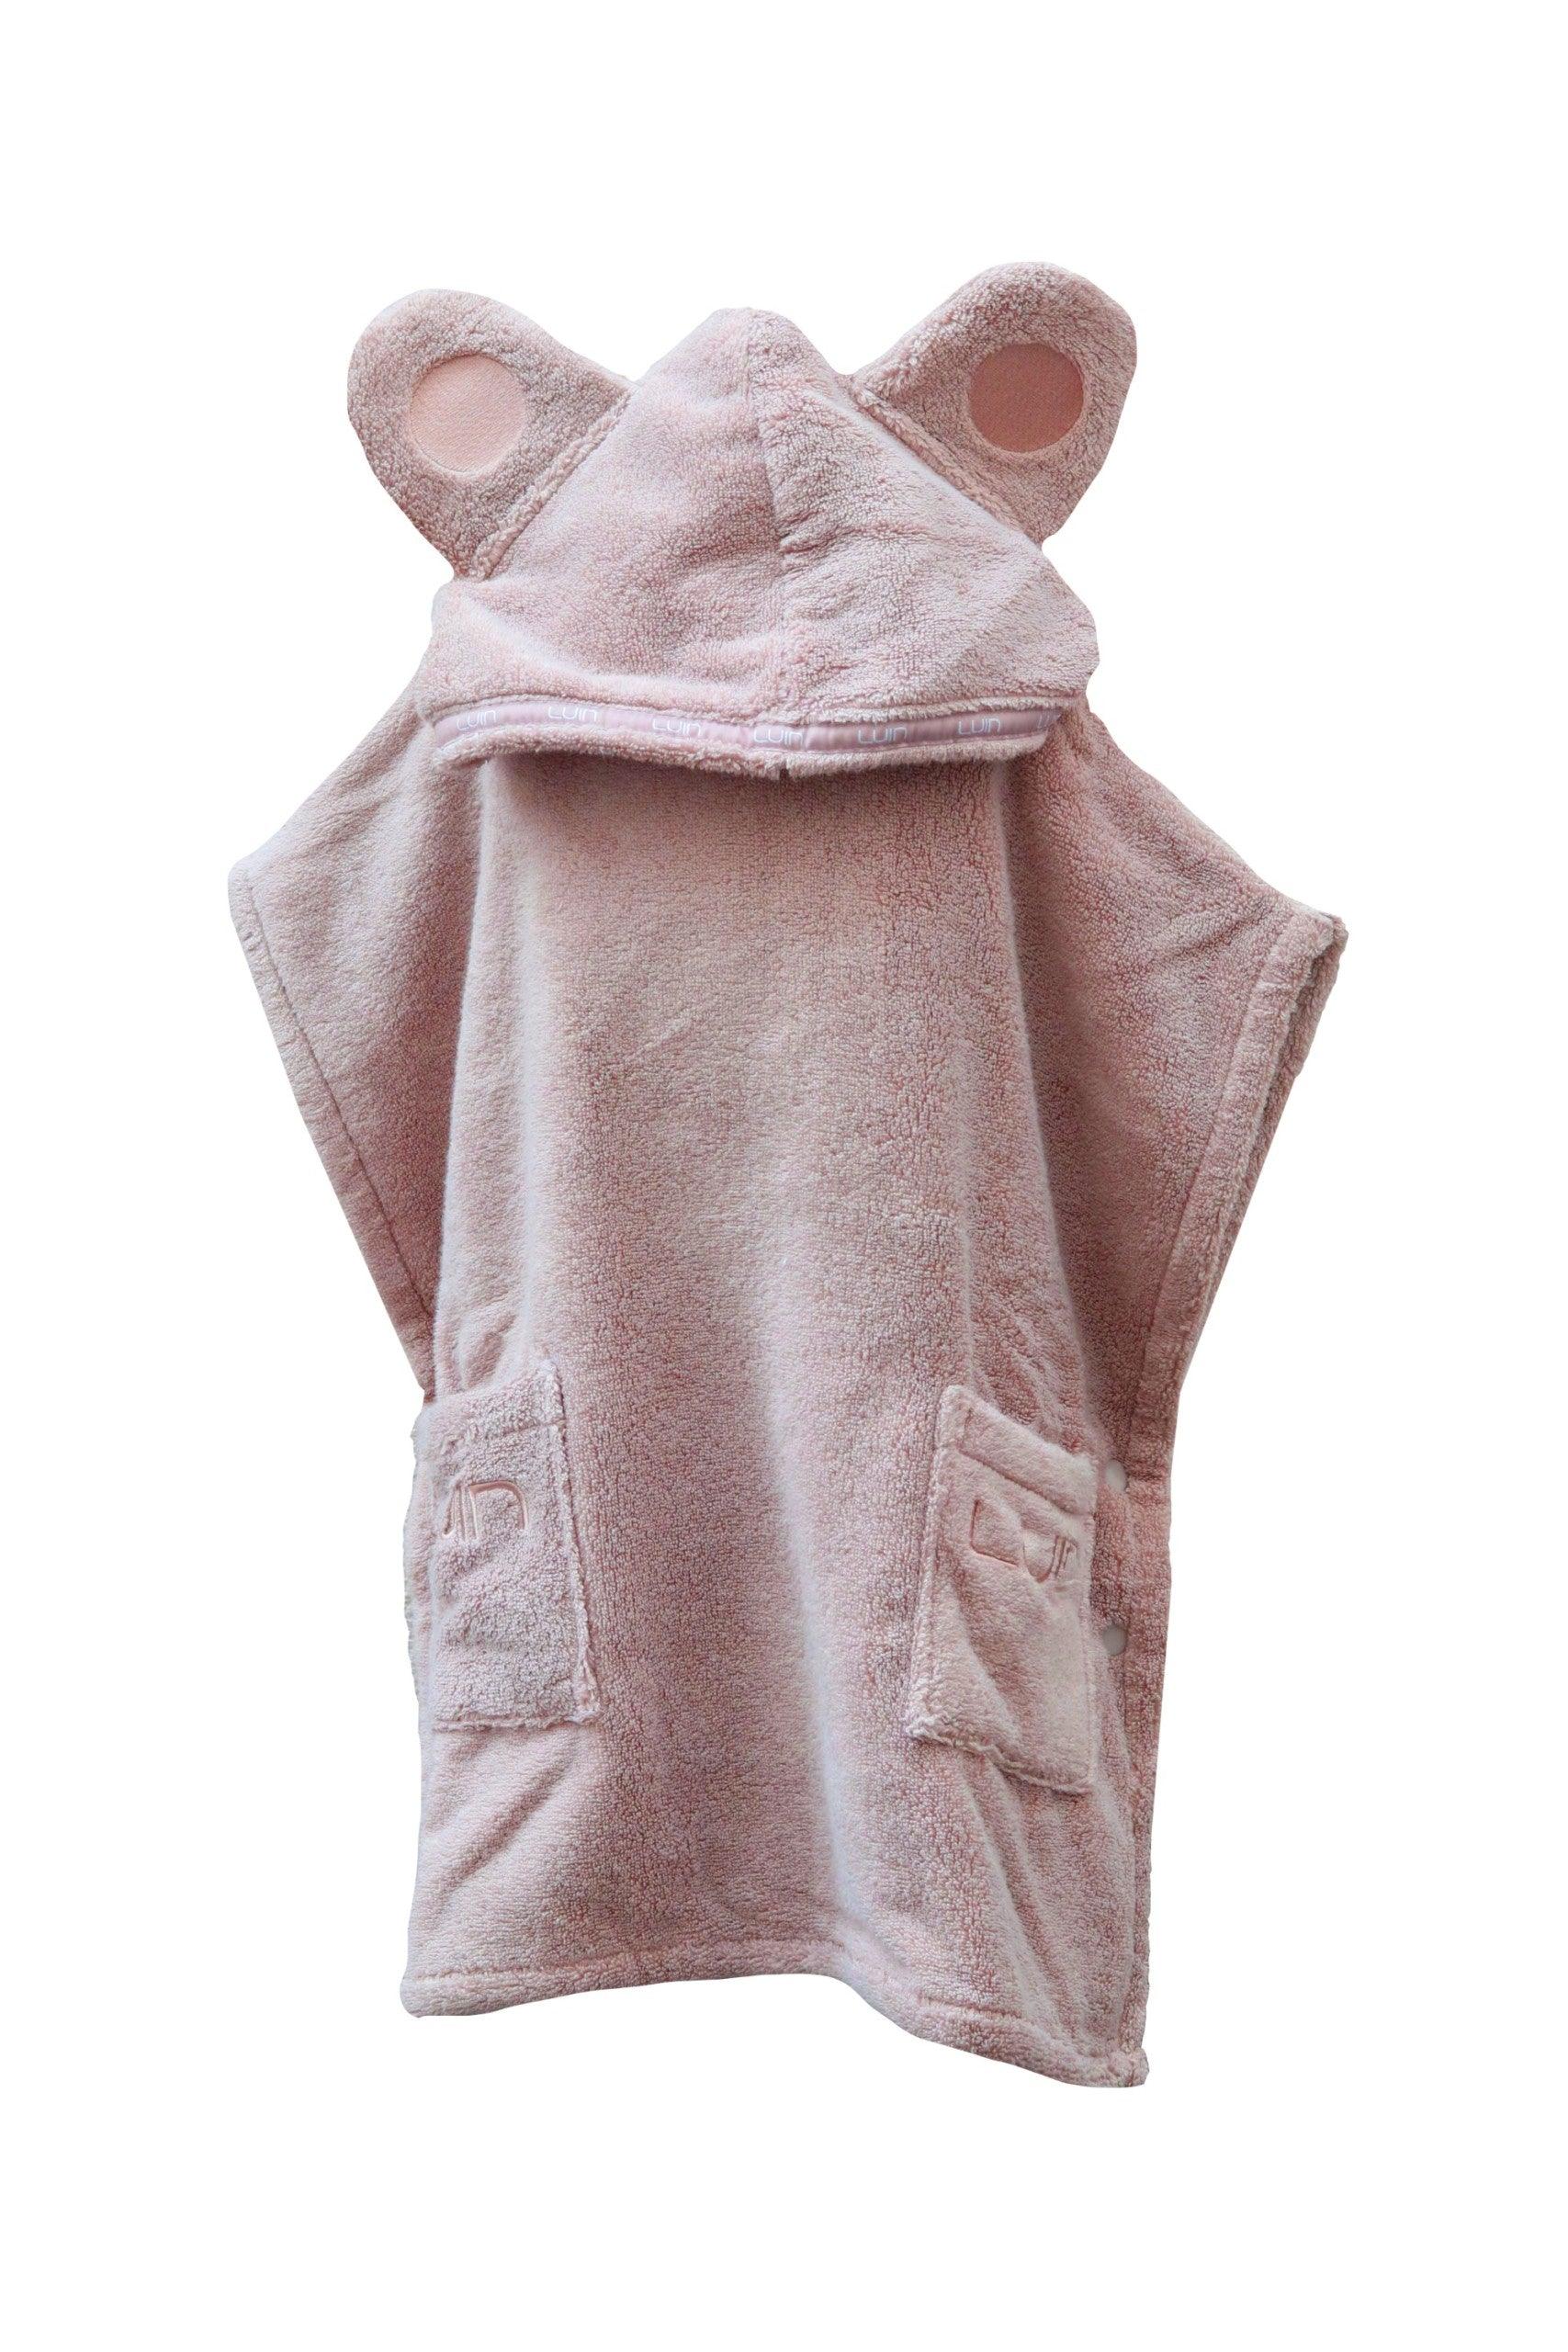 Poncho Towels for 1-10 yrs Dusty Rose - Elegant Linen